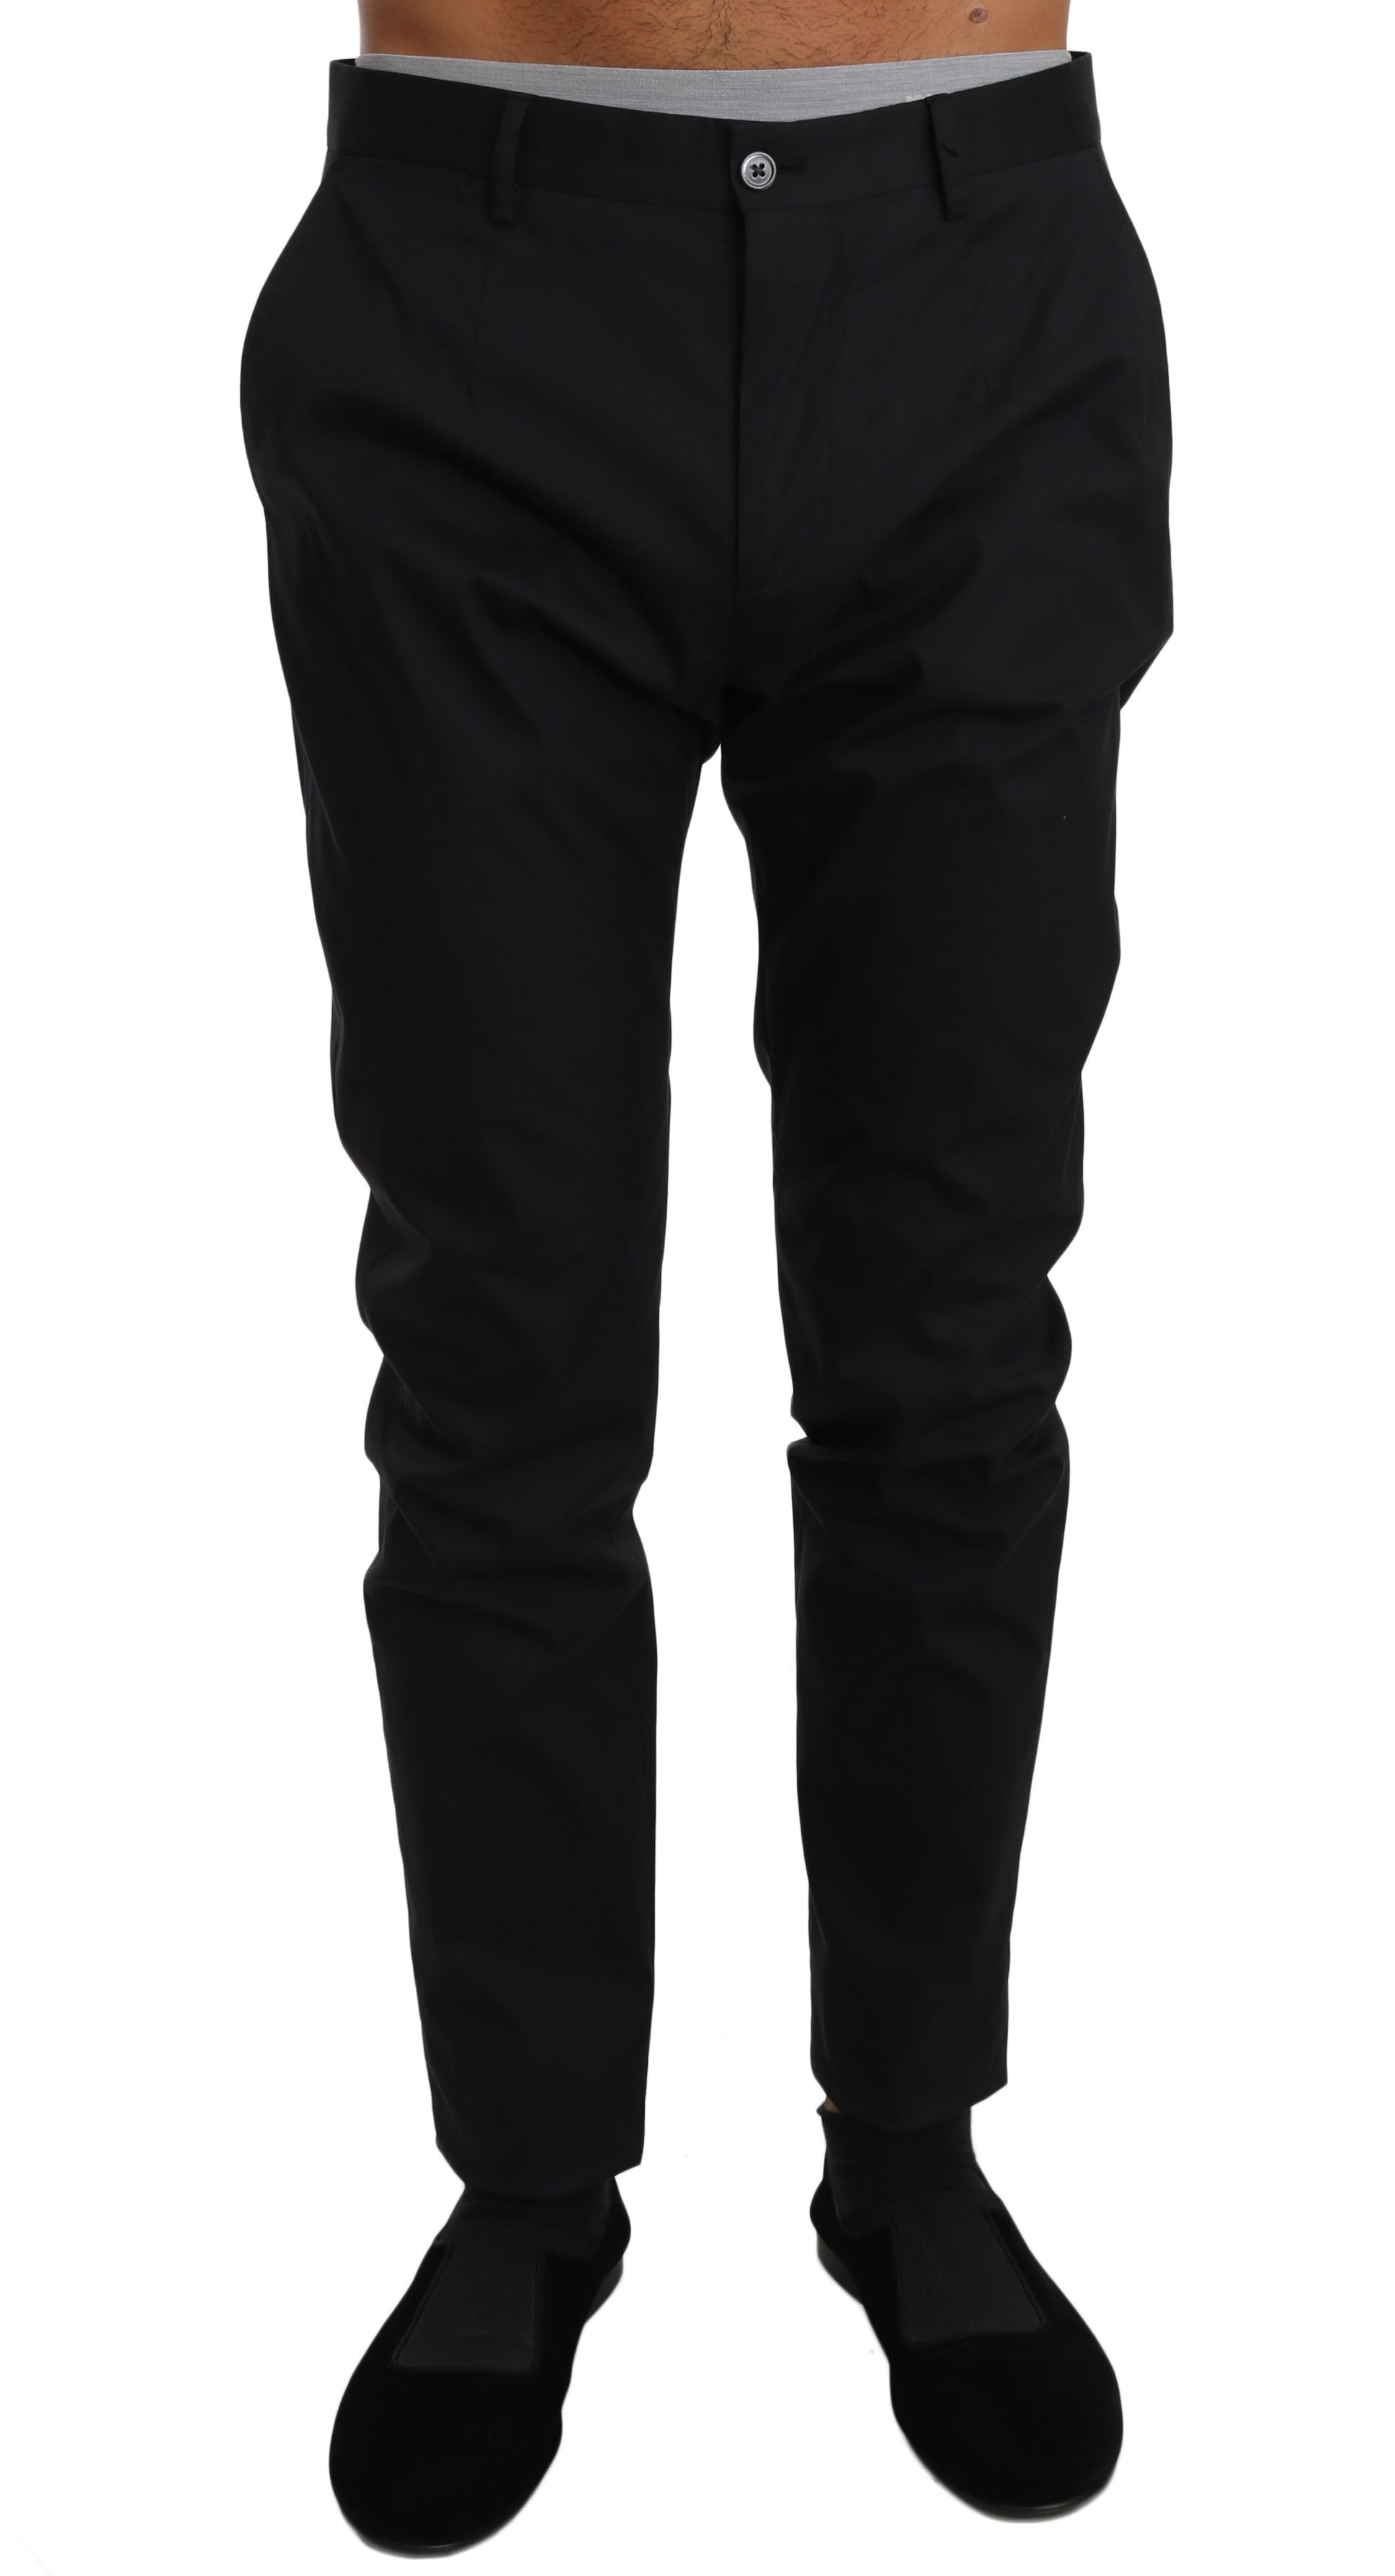 Dolce & Gabbana Black Cotton Stretch Formal Trousers Pants - Gio Beverly Hills